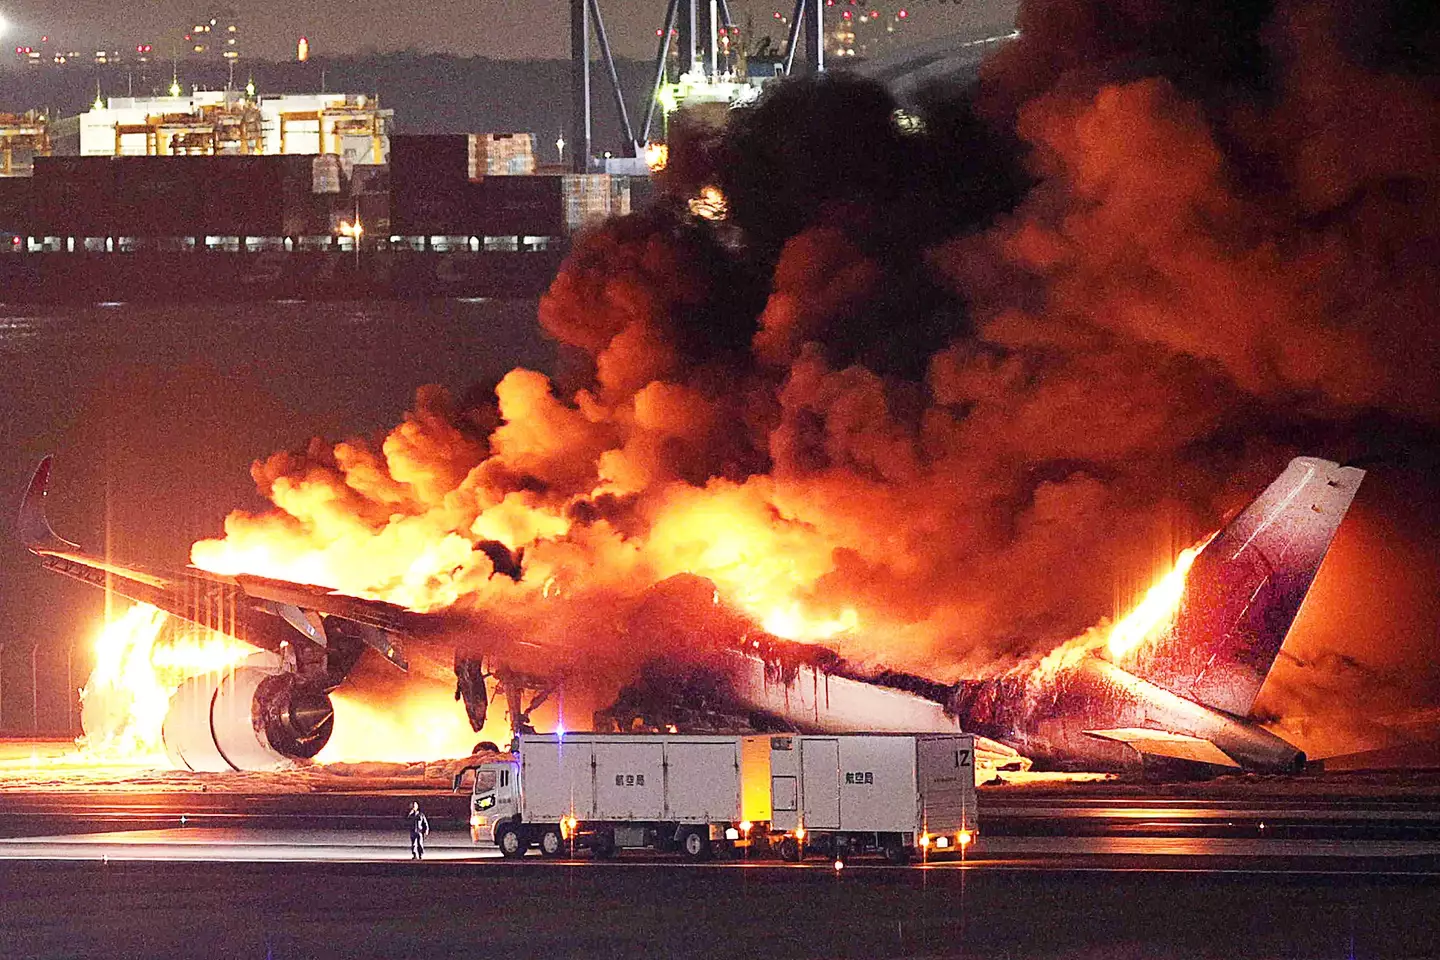 The plane was on fire on the runway, though all on board were able to evacuate.